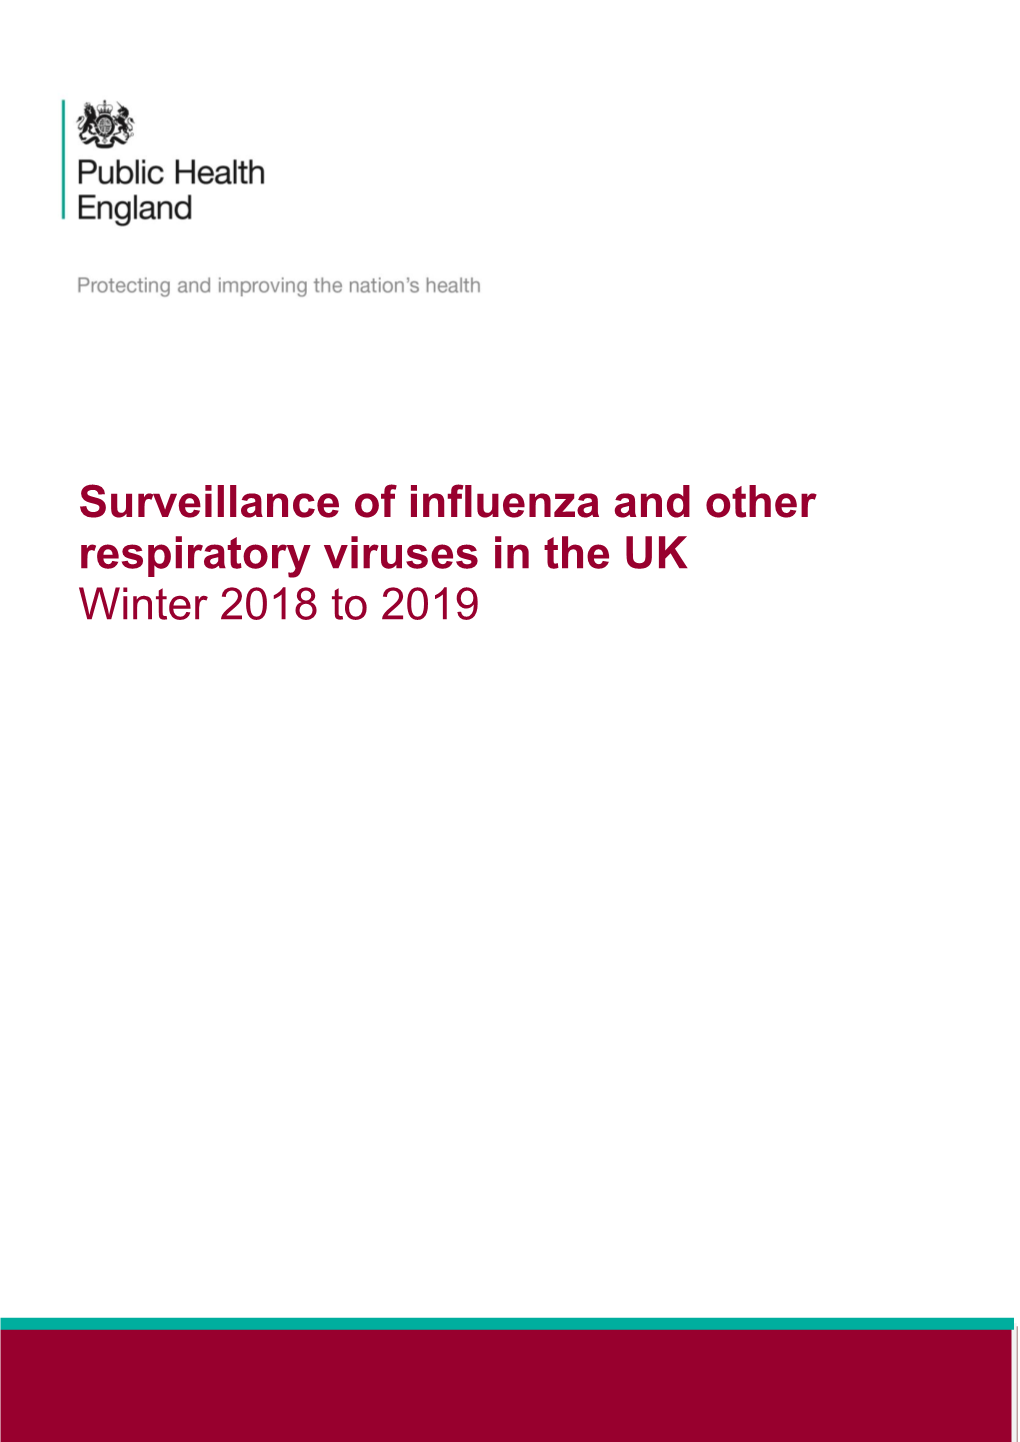 Surveillance of Influenza and Other Respiratory Viruses in the UK Winter 2018 to 2019